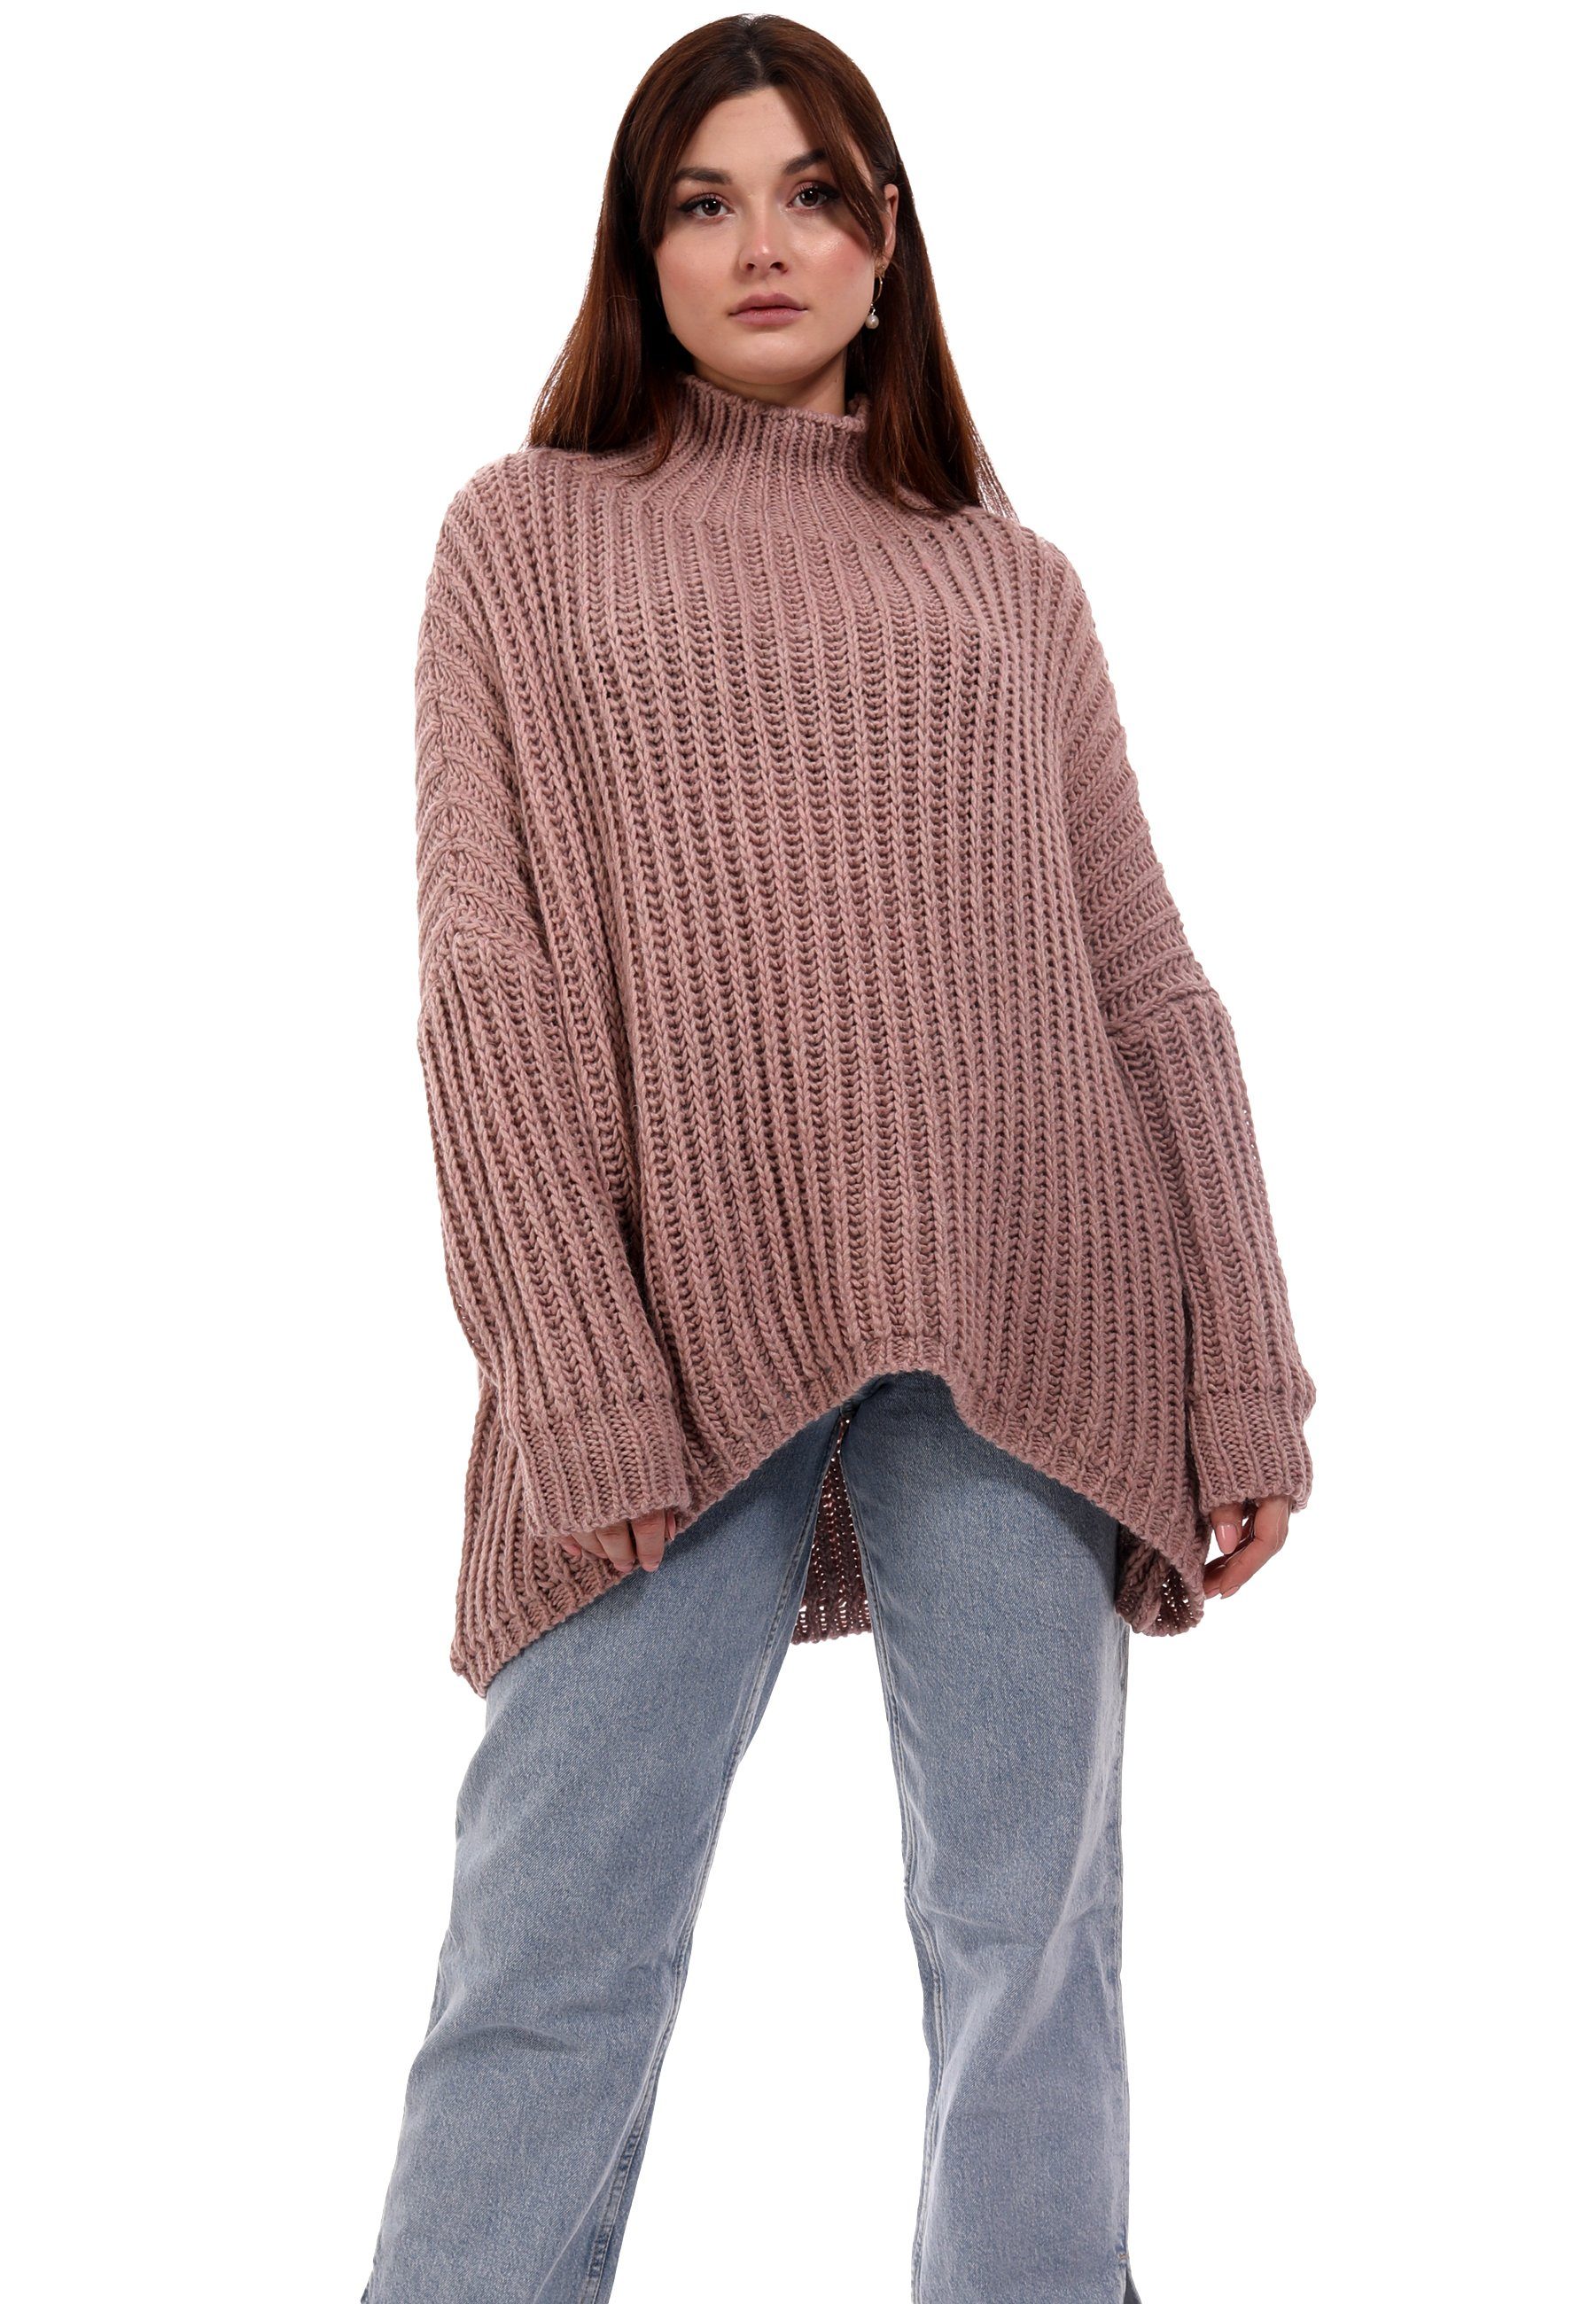 YC Fashion & Style Longpullover Oversized Pullover Grobstrick Vokuhila Sweater One Size (1-tlg) casual altrosa